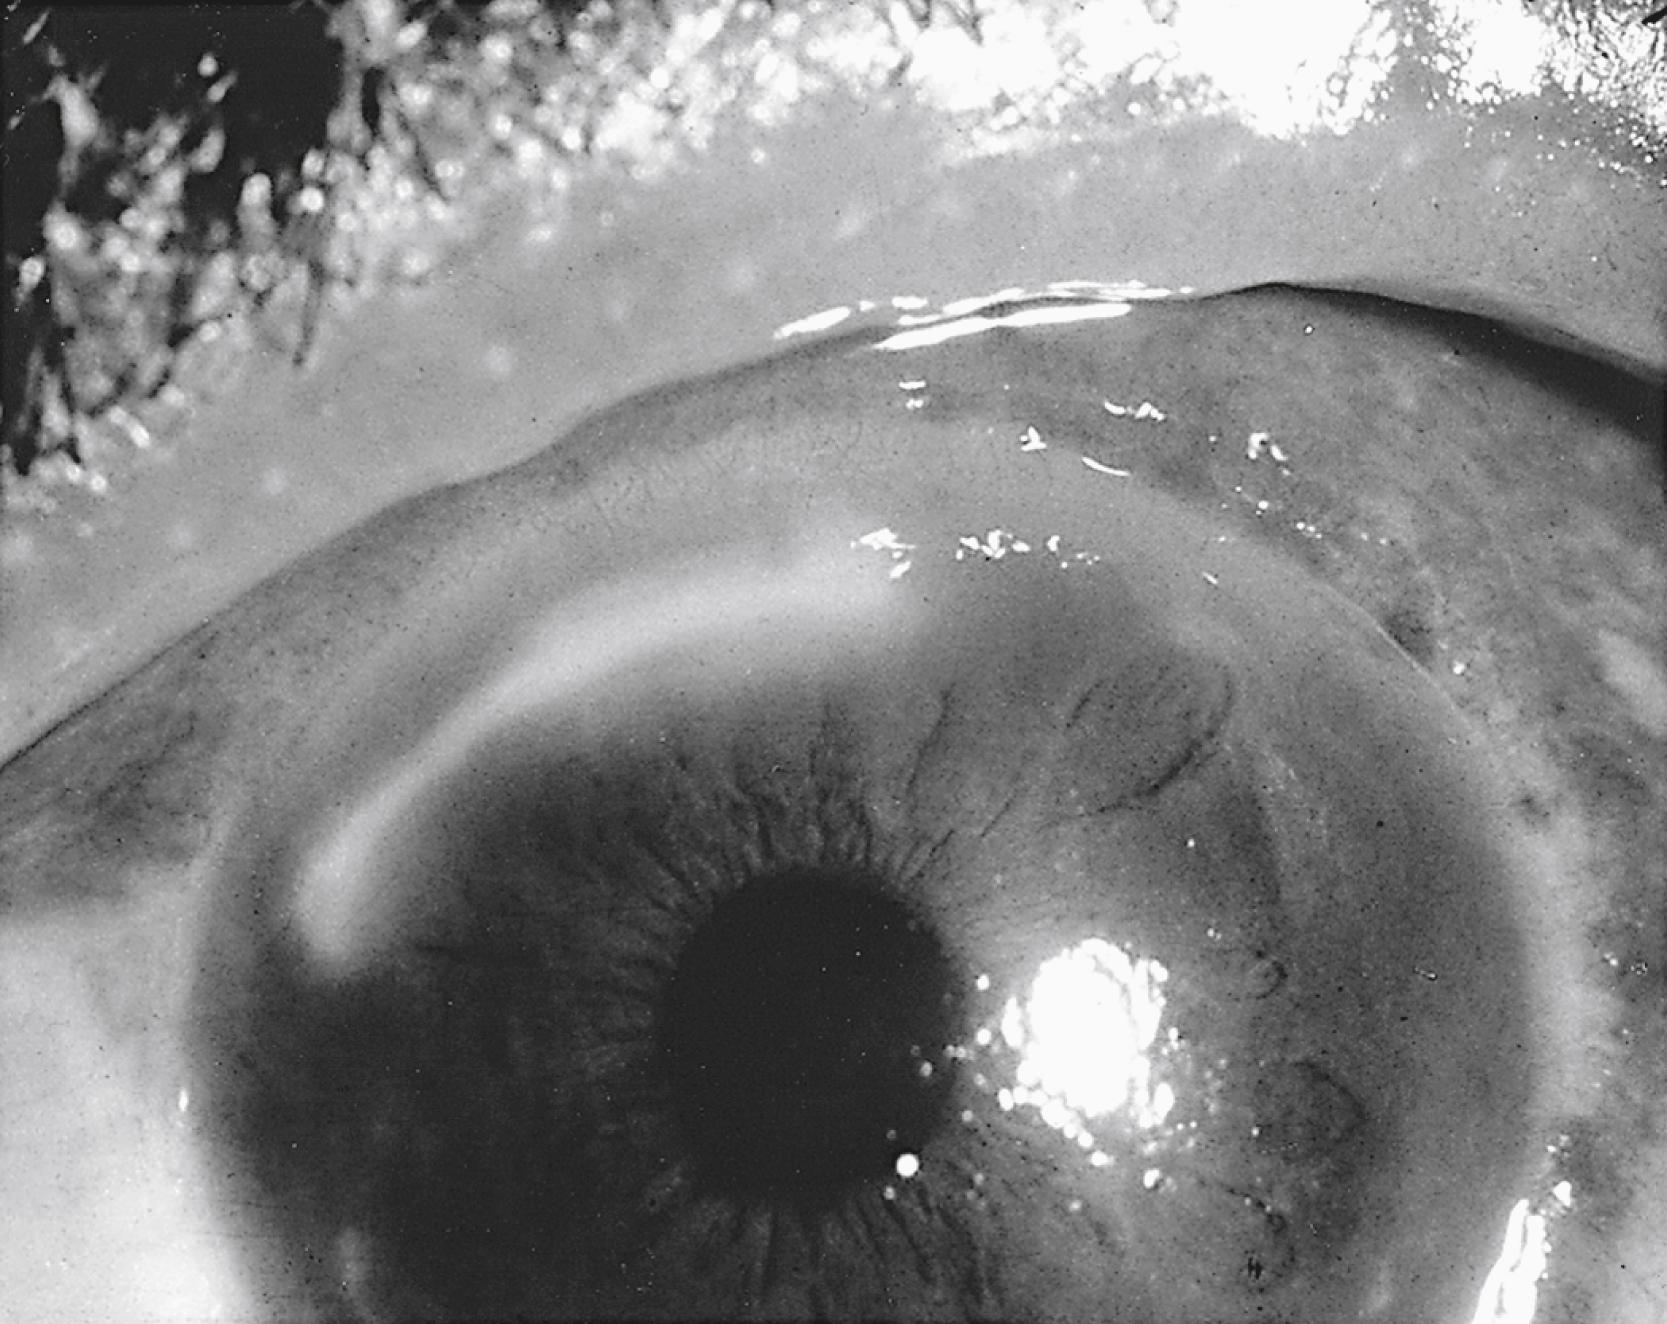 FIGURE 81.5, Extensive marginal keratitis in a child secondary to staphylococcal lid disease. Note the characteristic lucid interval between arcuate infiltrate and corneal limbus.